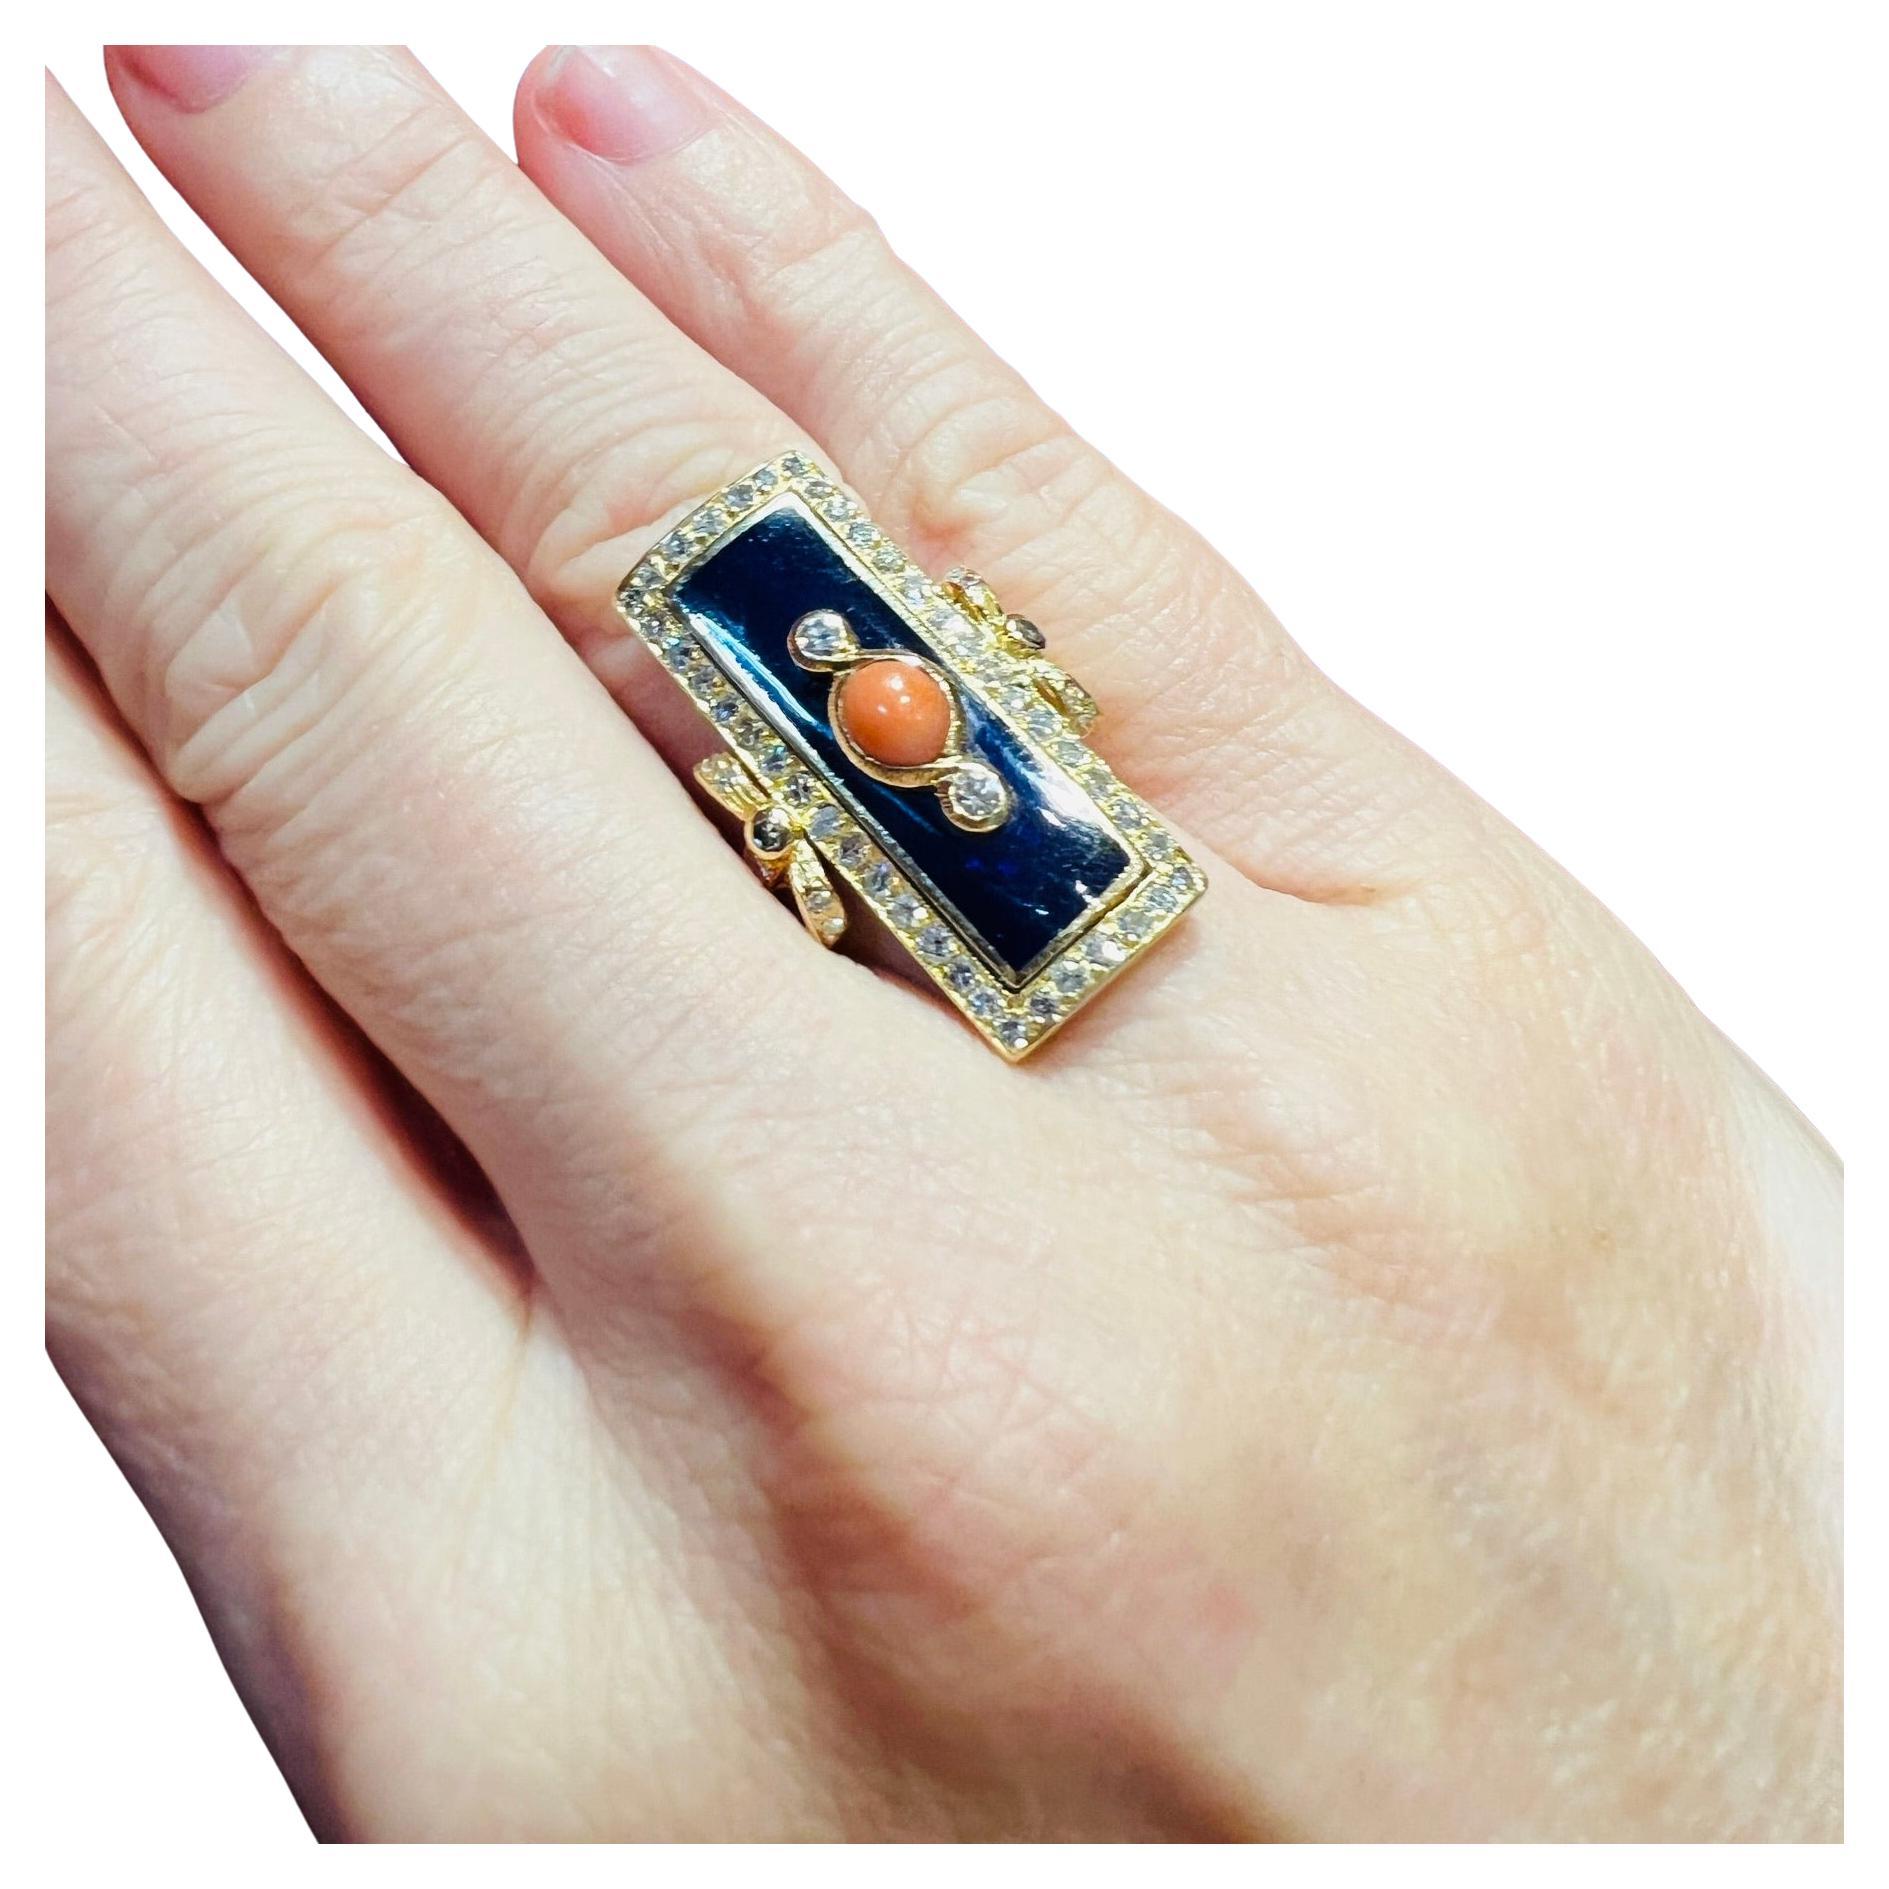 18-Carat Gold Ring Set with Blue Enamel Coral and Pavé Diamond